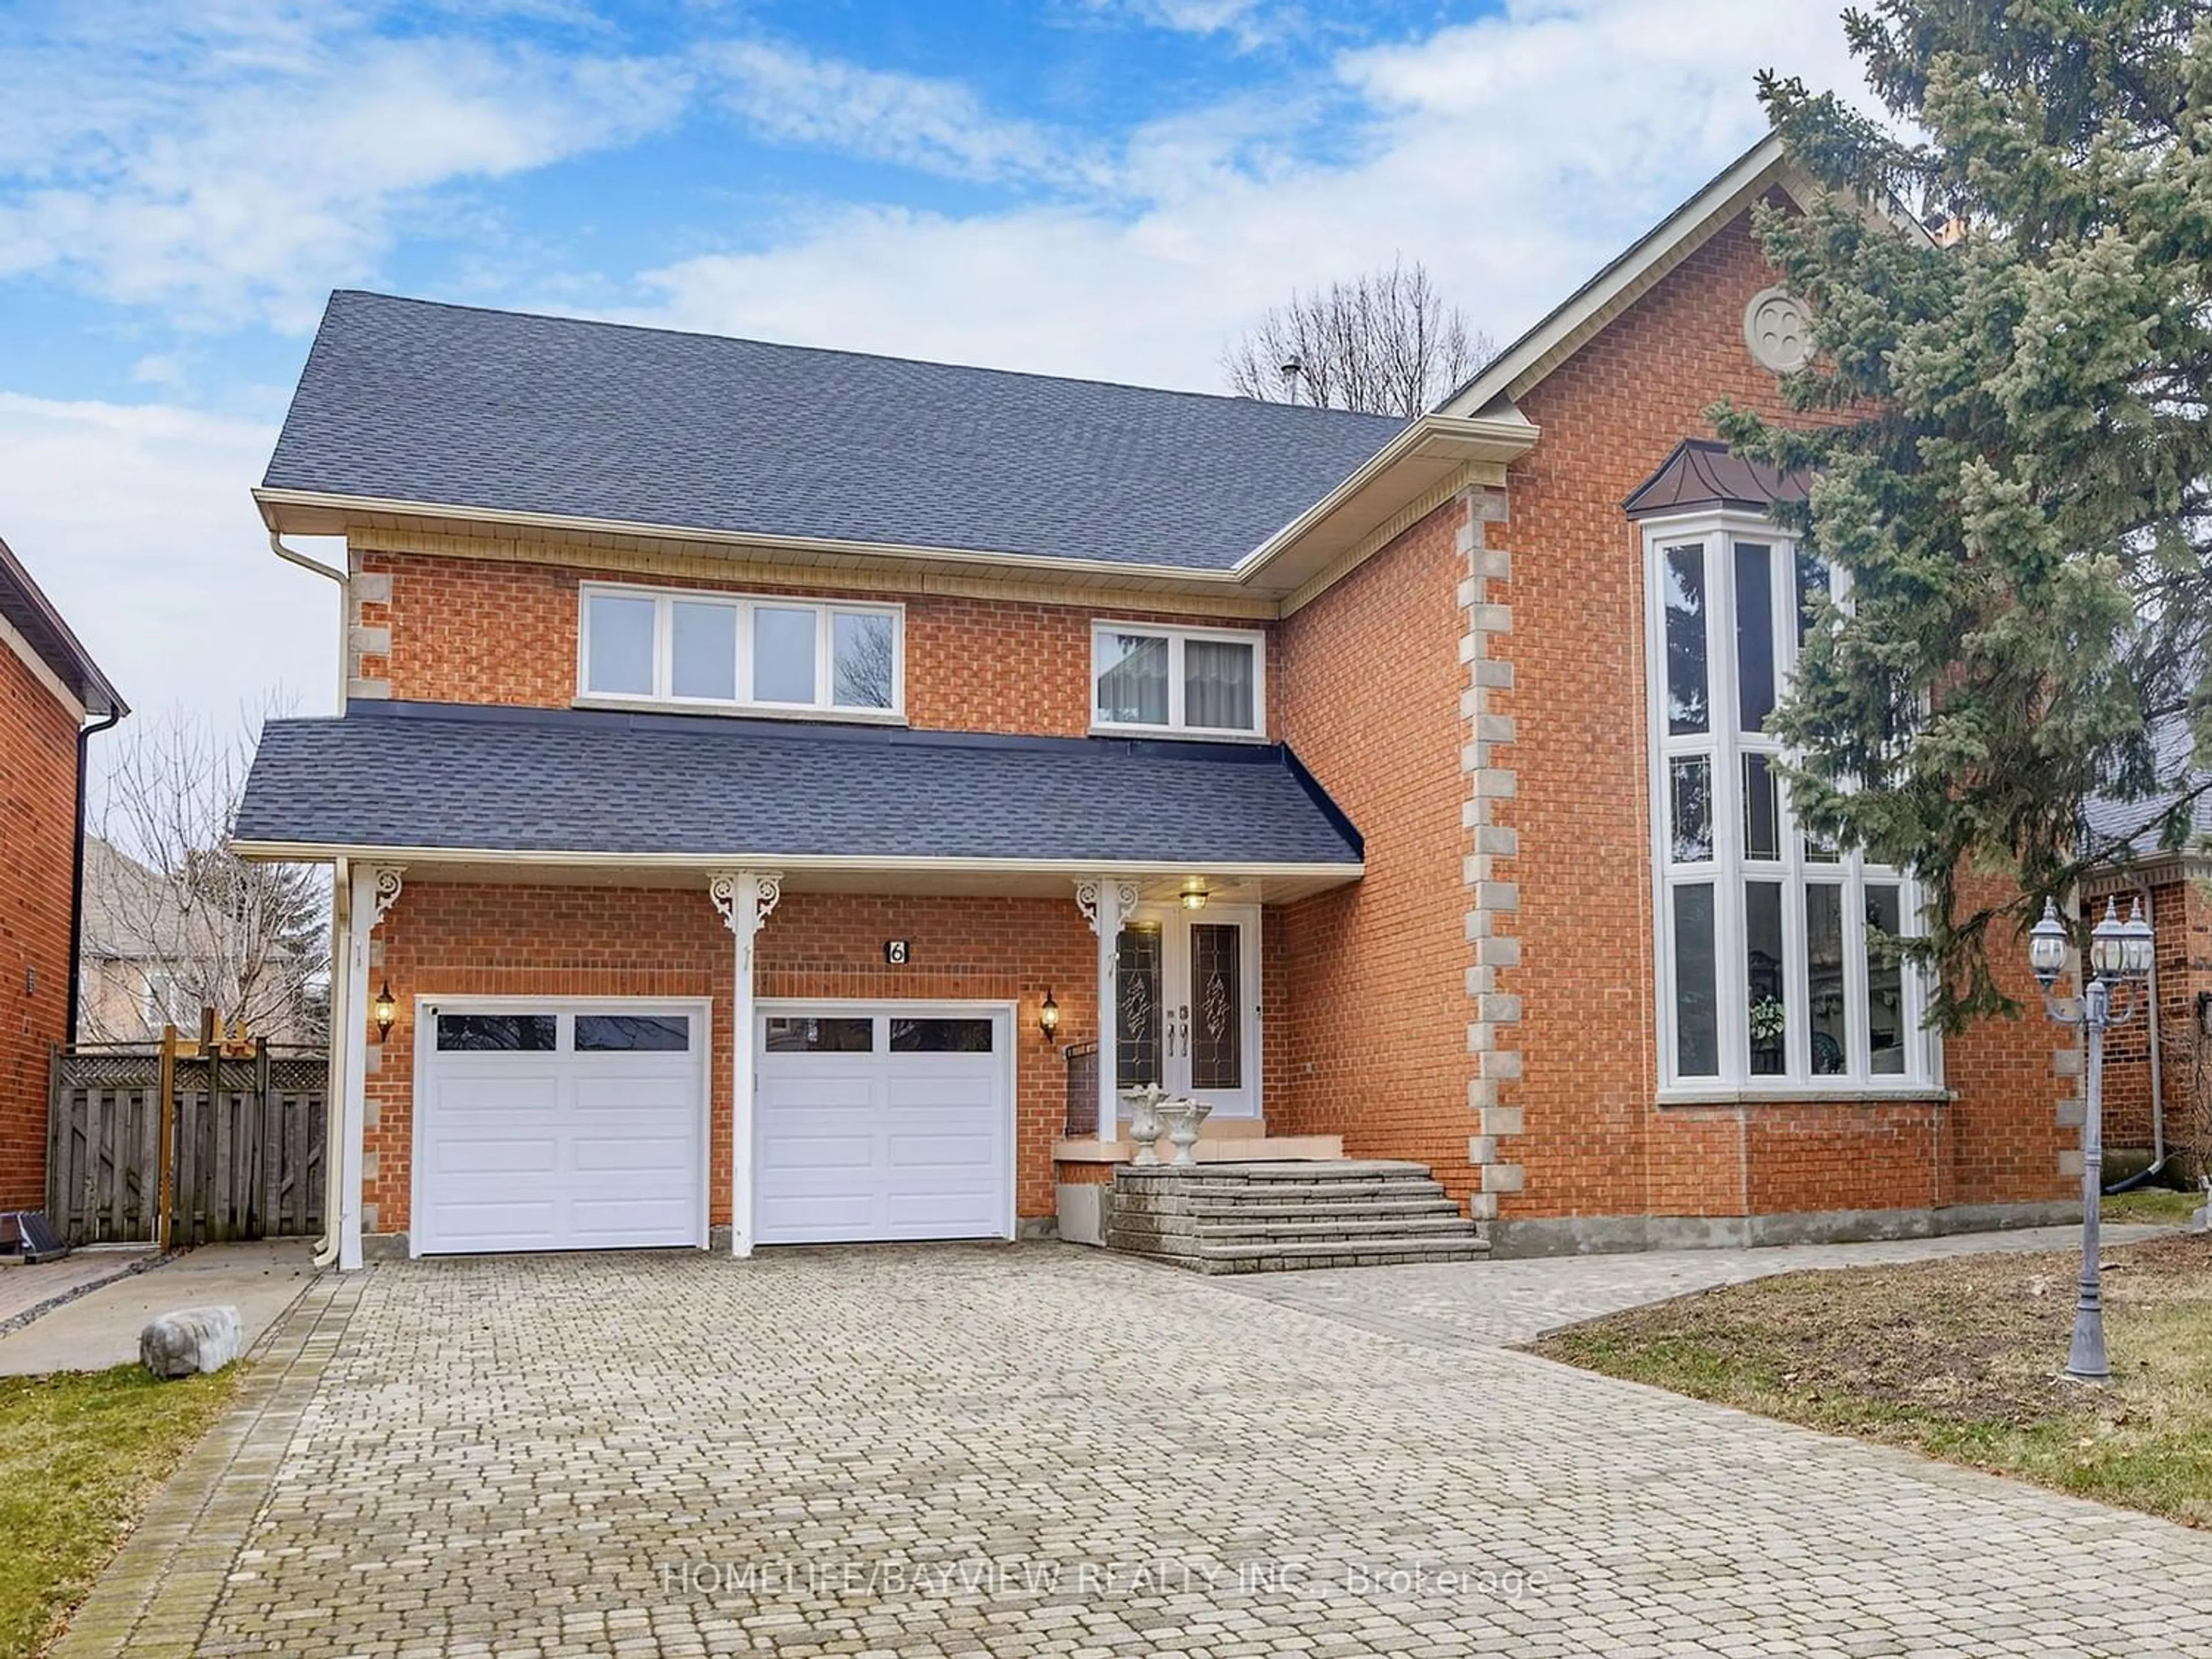 Home with brick exterior material for 6 Dalewood Dr, Richmond Hill Ontario L4B 3C3